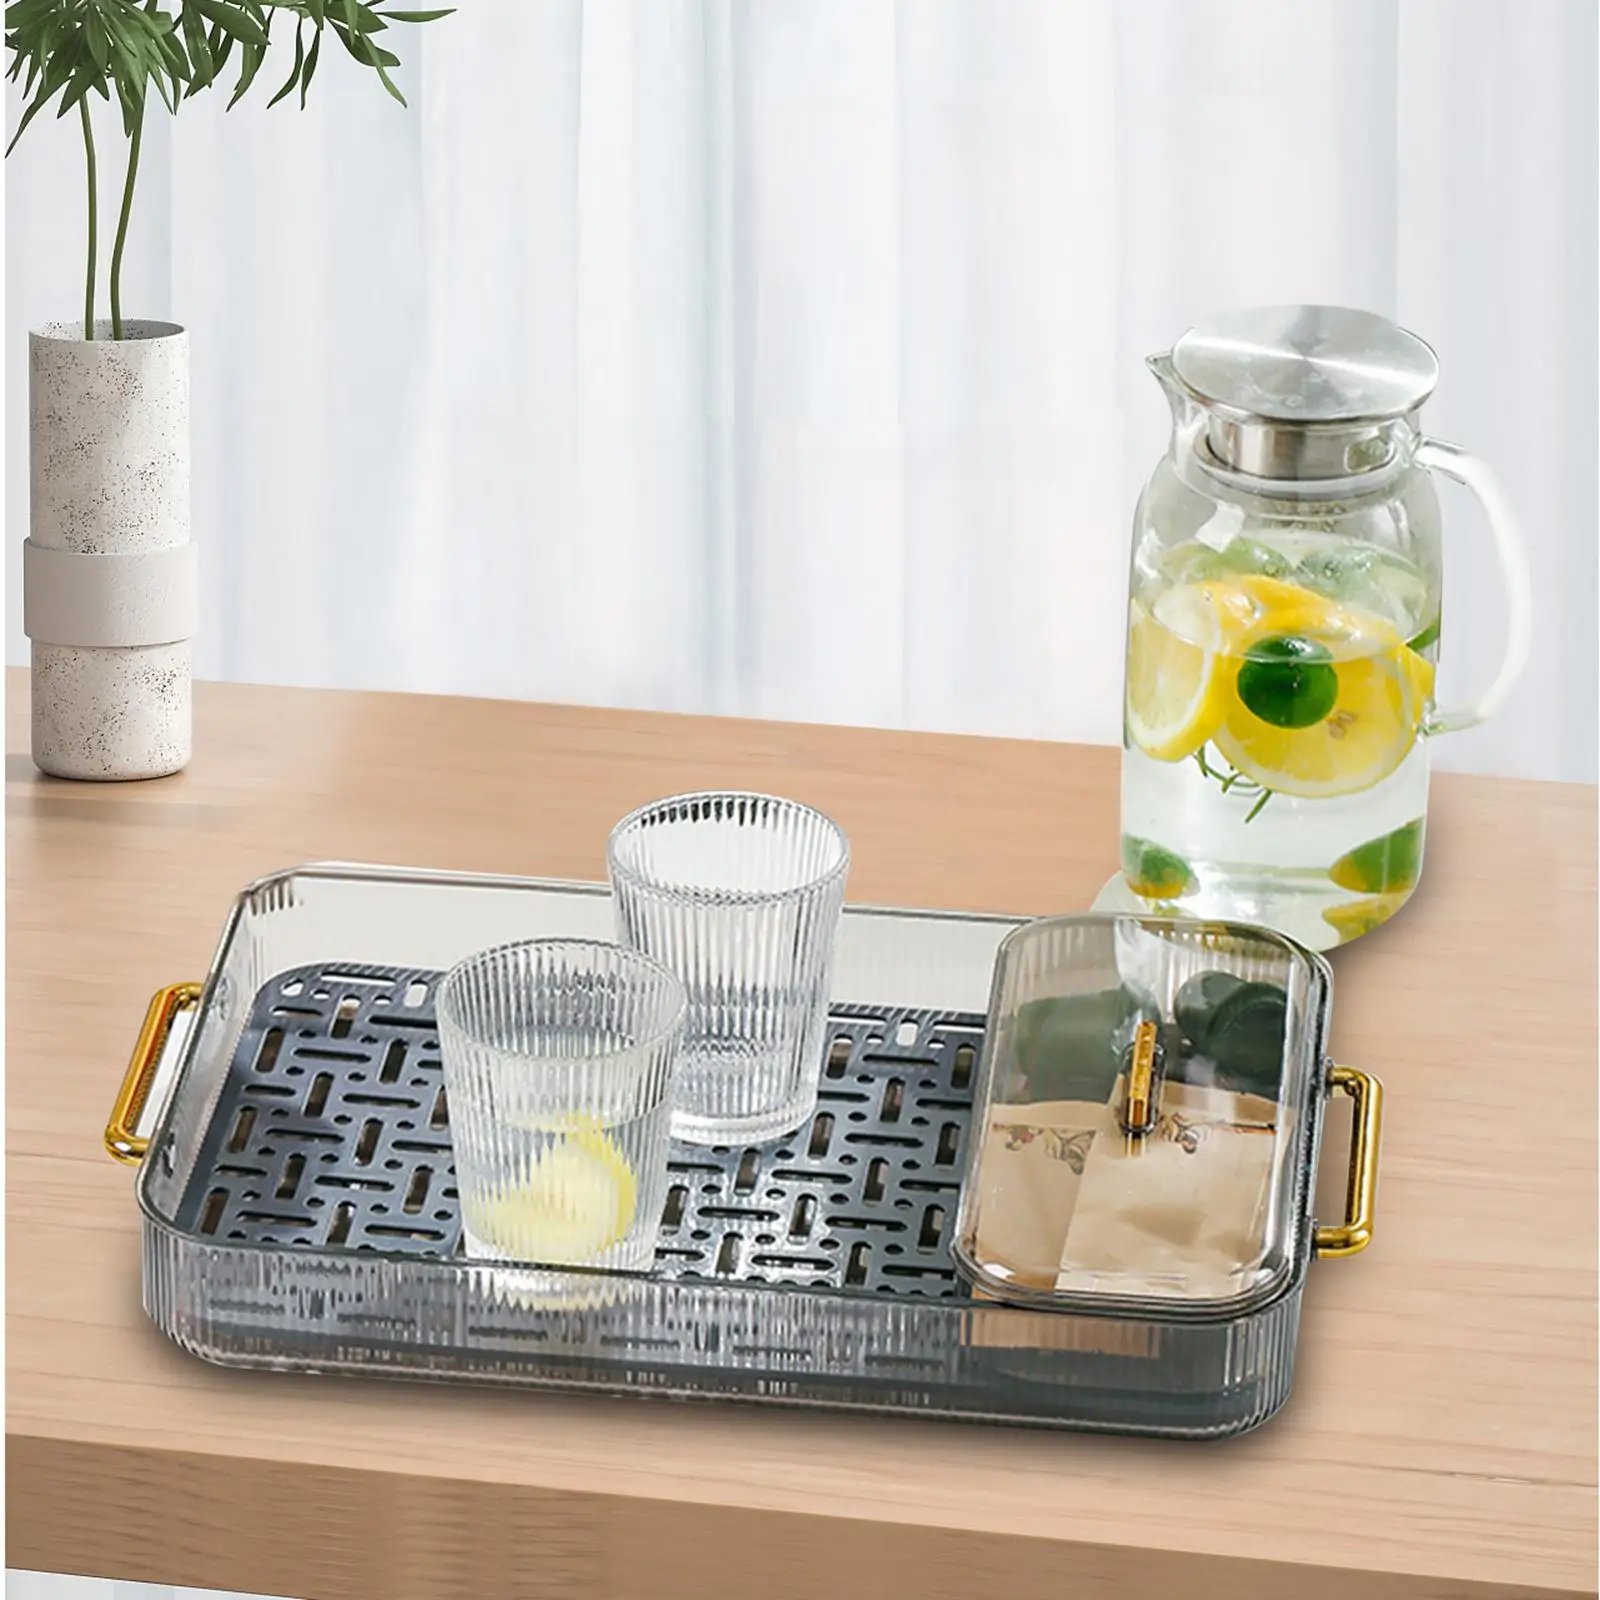 Drain Tray tray Home Decor Luxury Handle Tea Tray Water Storage Tray for Home Dining Room Kitchen Countertop Living Room